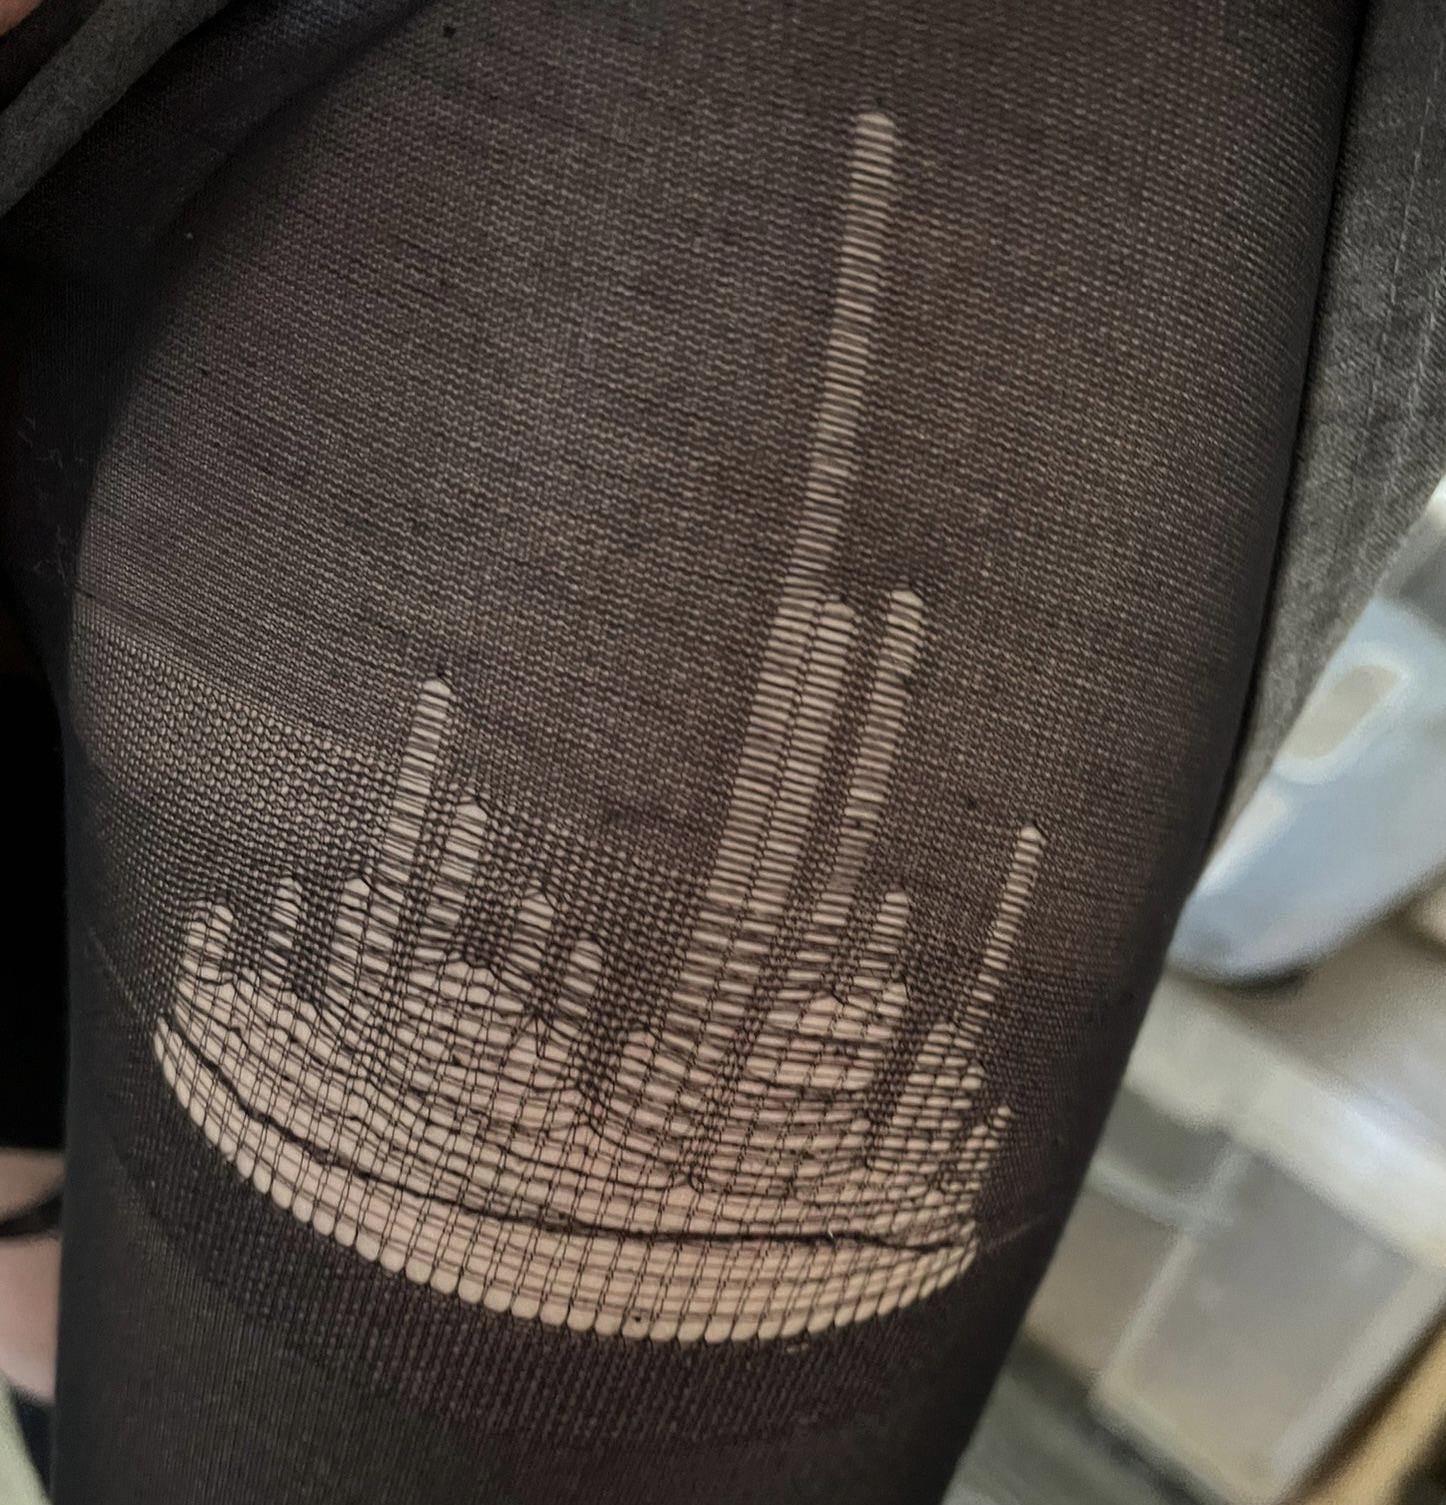 torn tights with a hole that looks like a city skyline